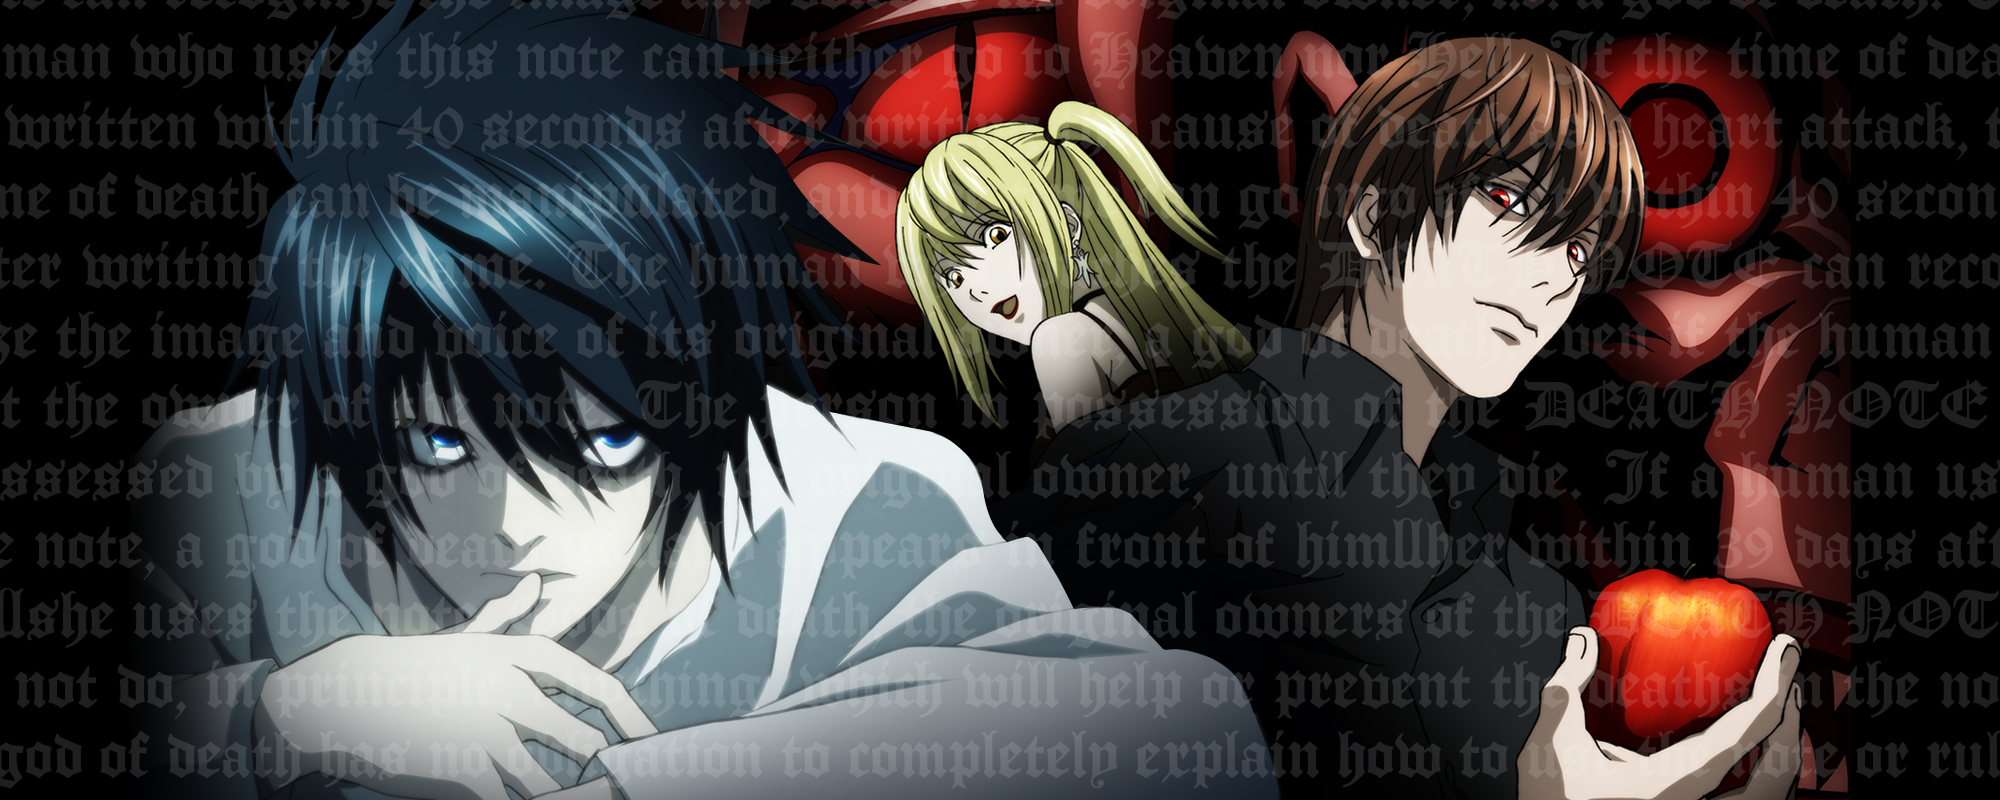 characters from anime Death Note